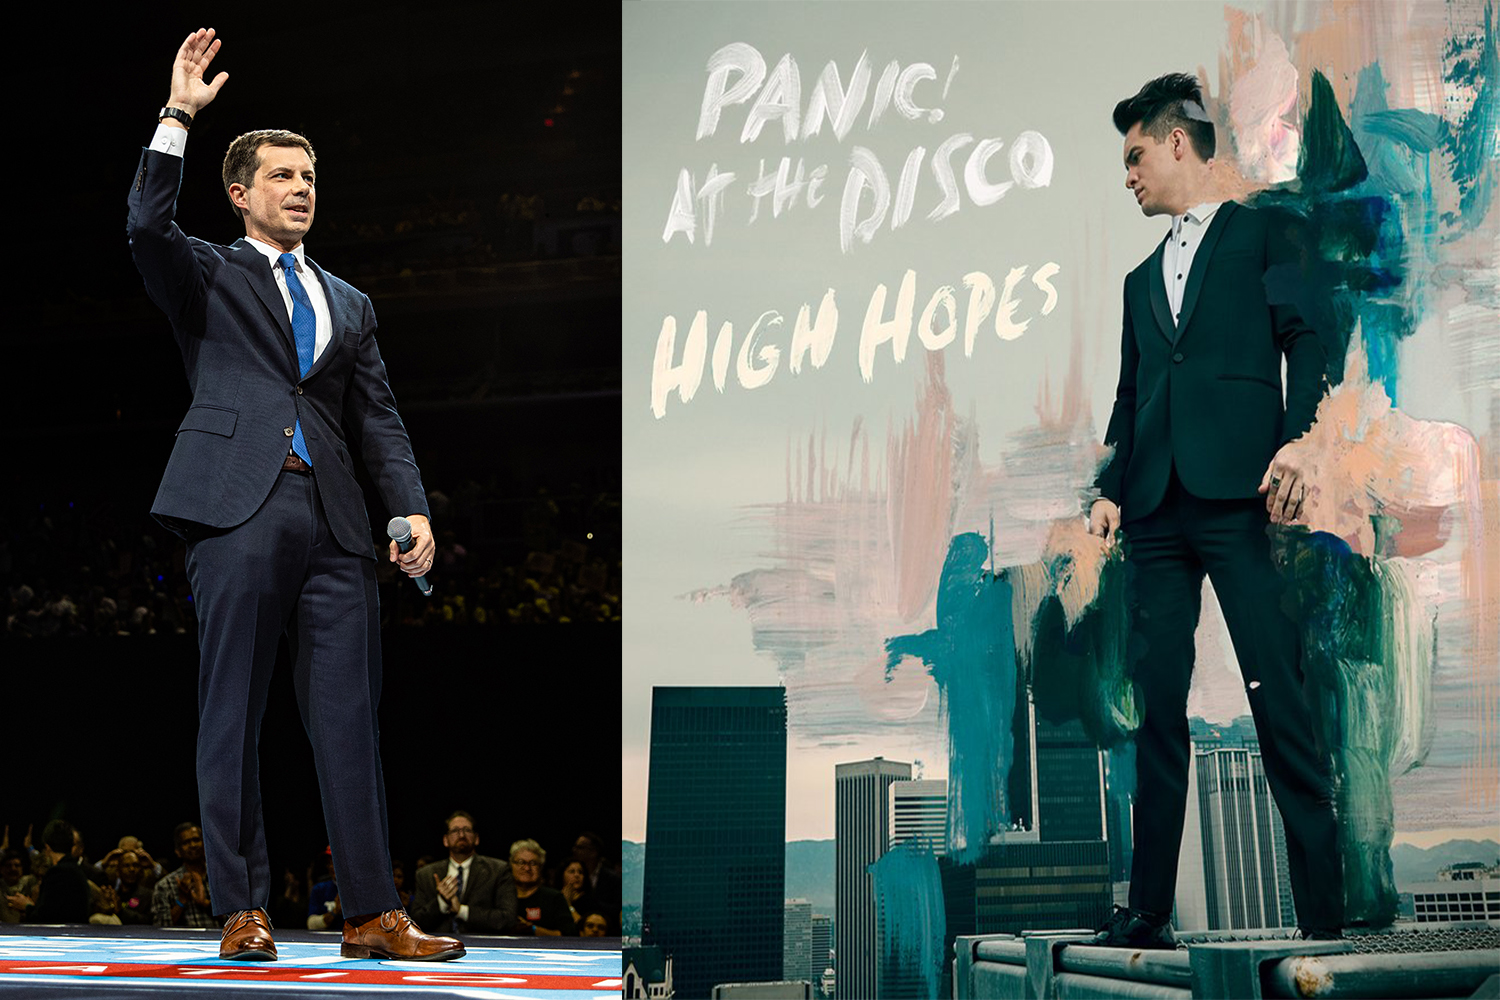 Pete Buttigieg, South Bend, Indiana Mayor:  “High Hopes” by Panic! At the Disco